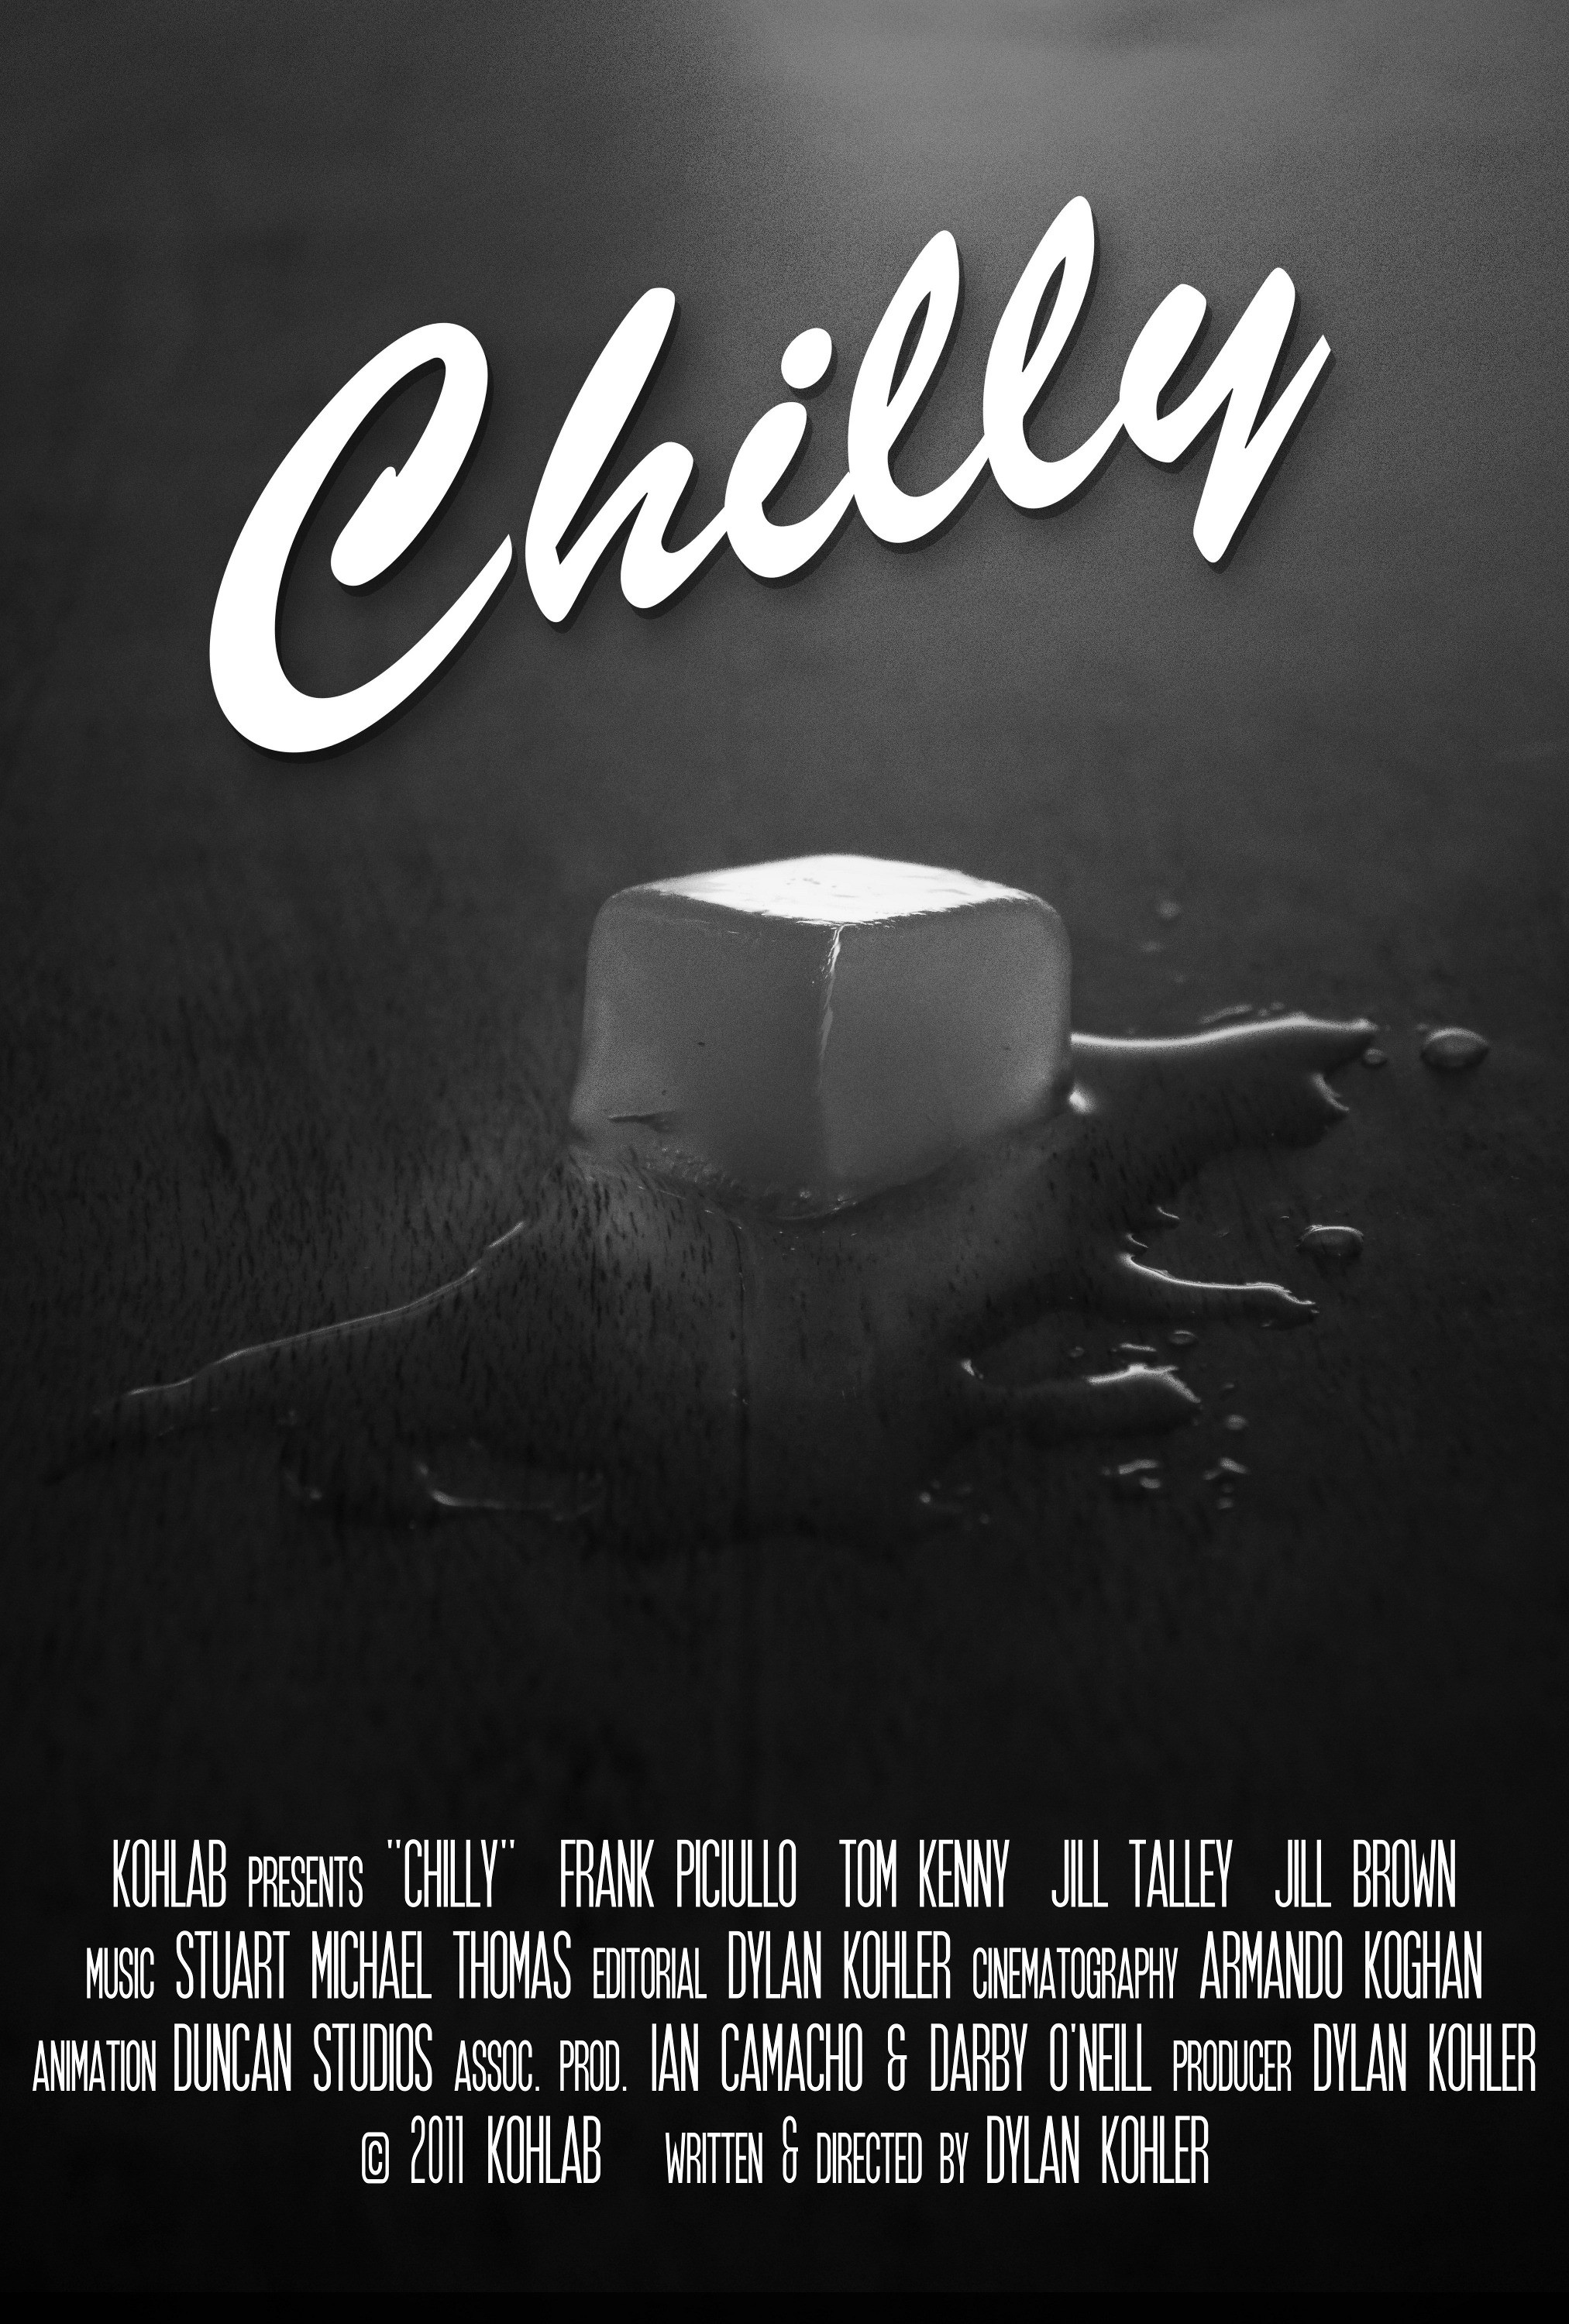 Mega Sized Movie Poster Image for Chilly